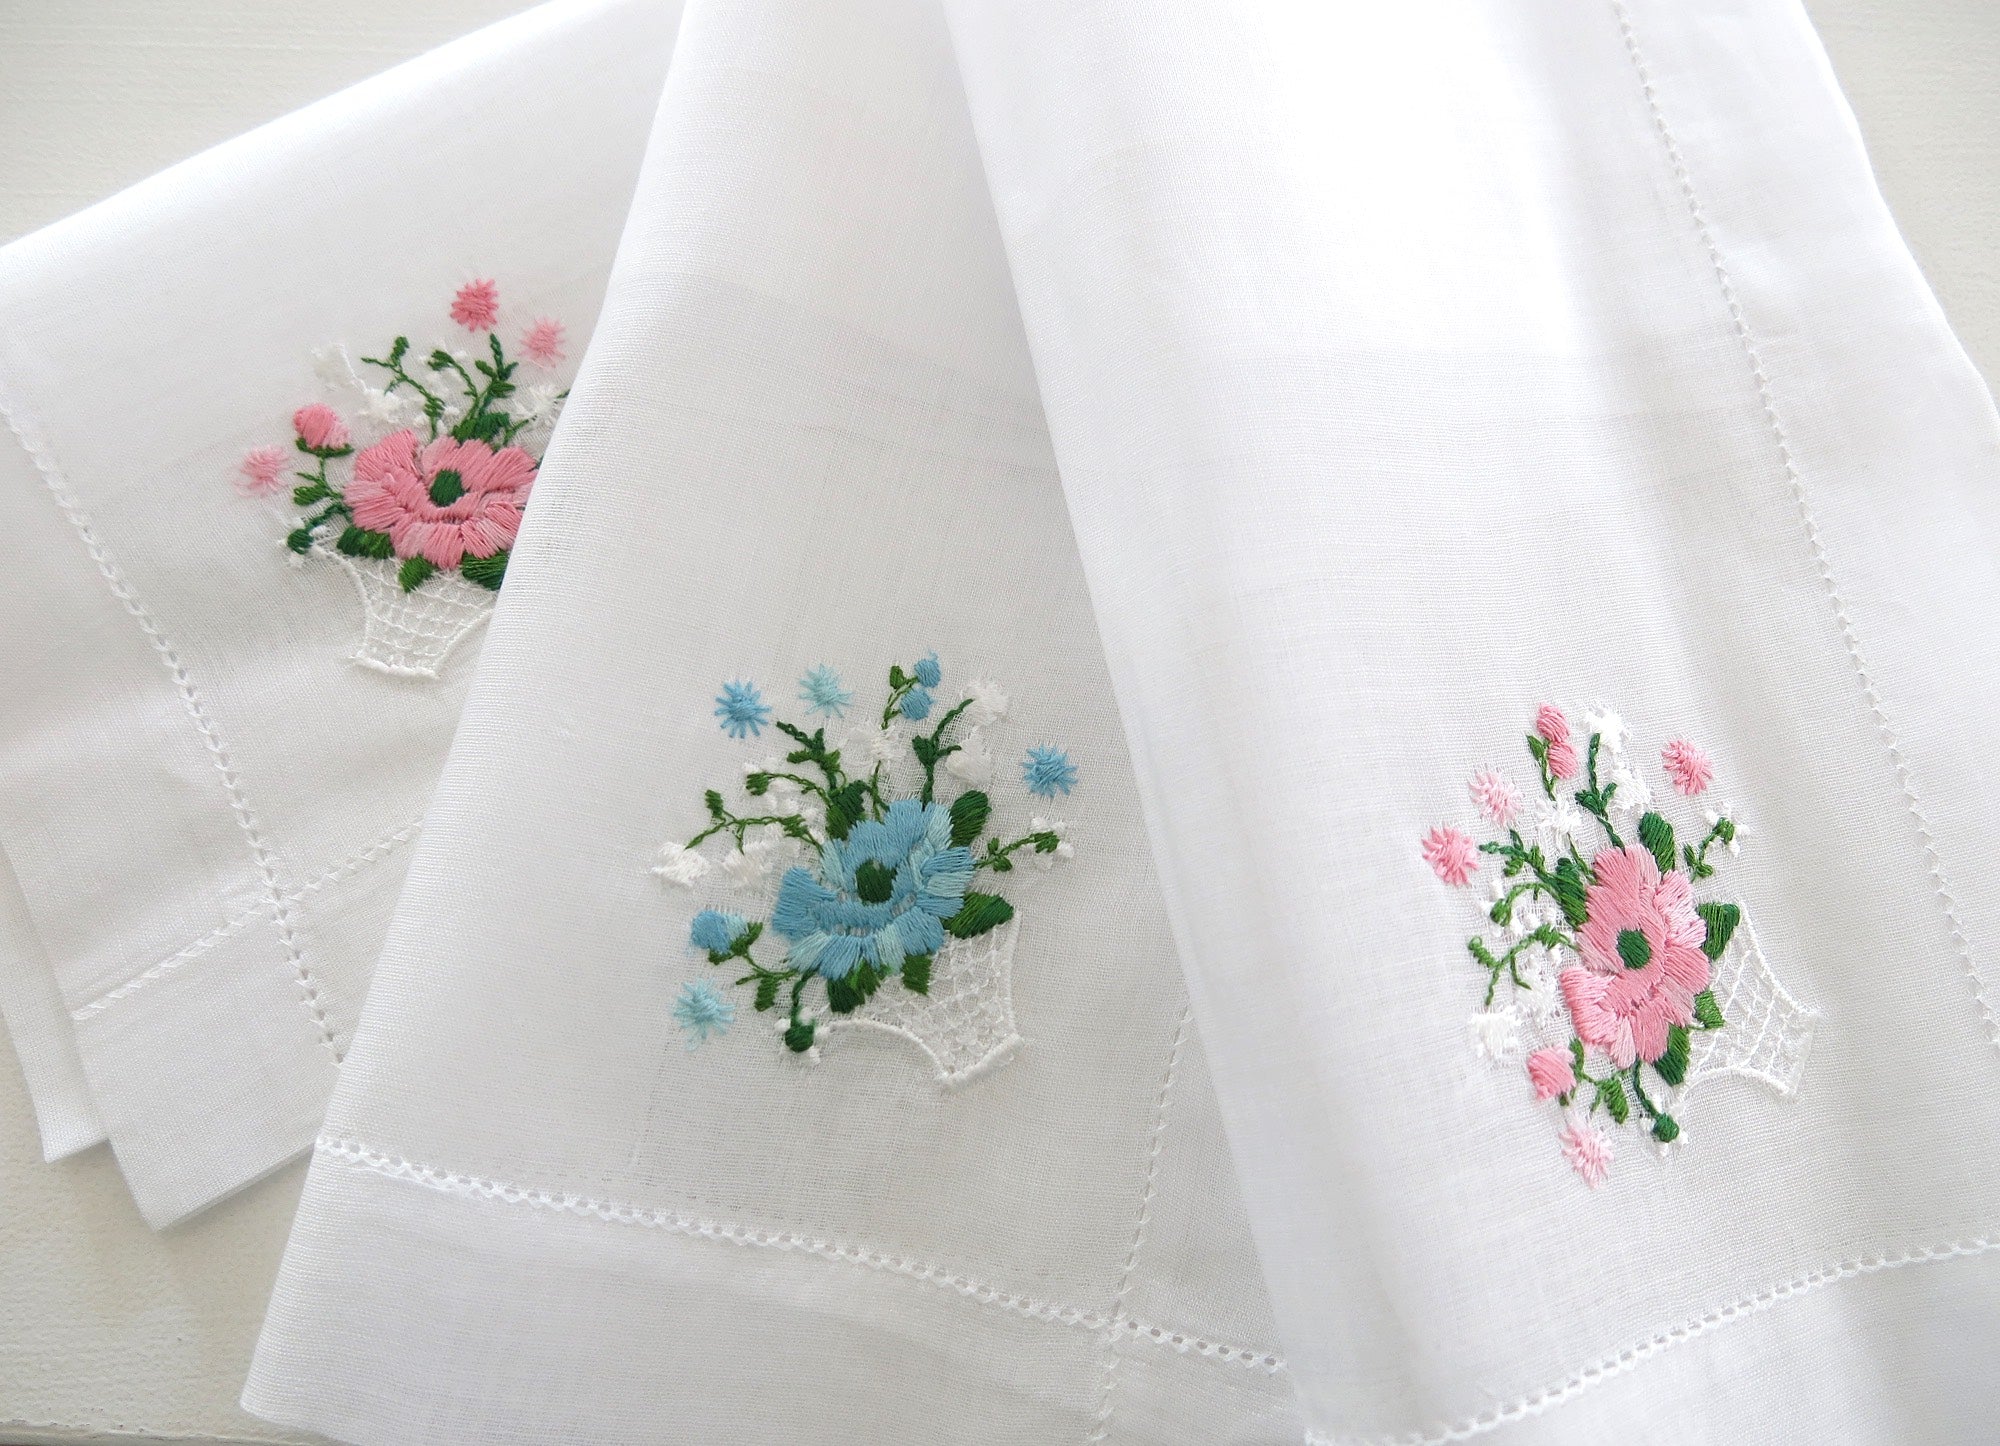 Swiss Made Cotton Handkercheif with Flower Basket Embroidery, set of 3